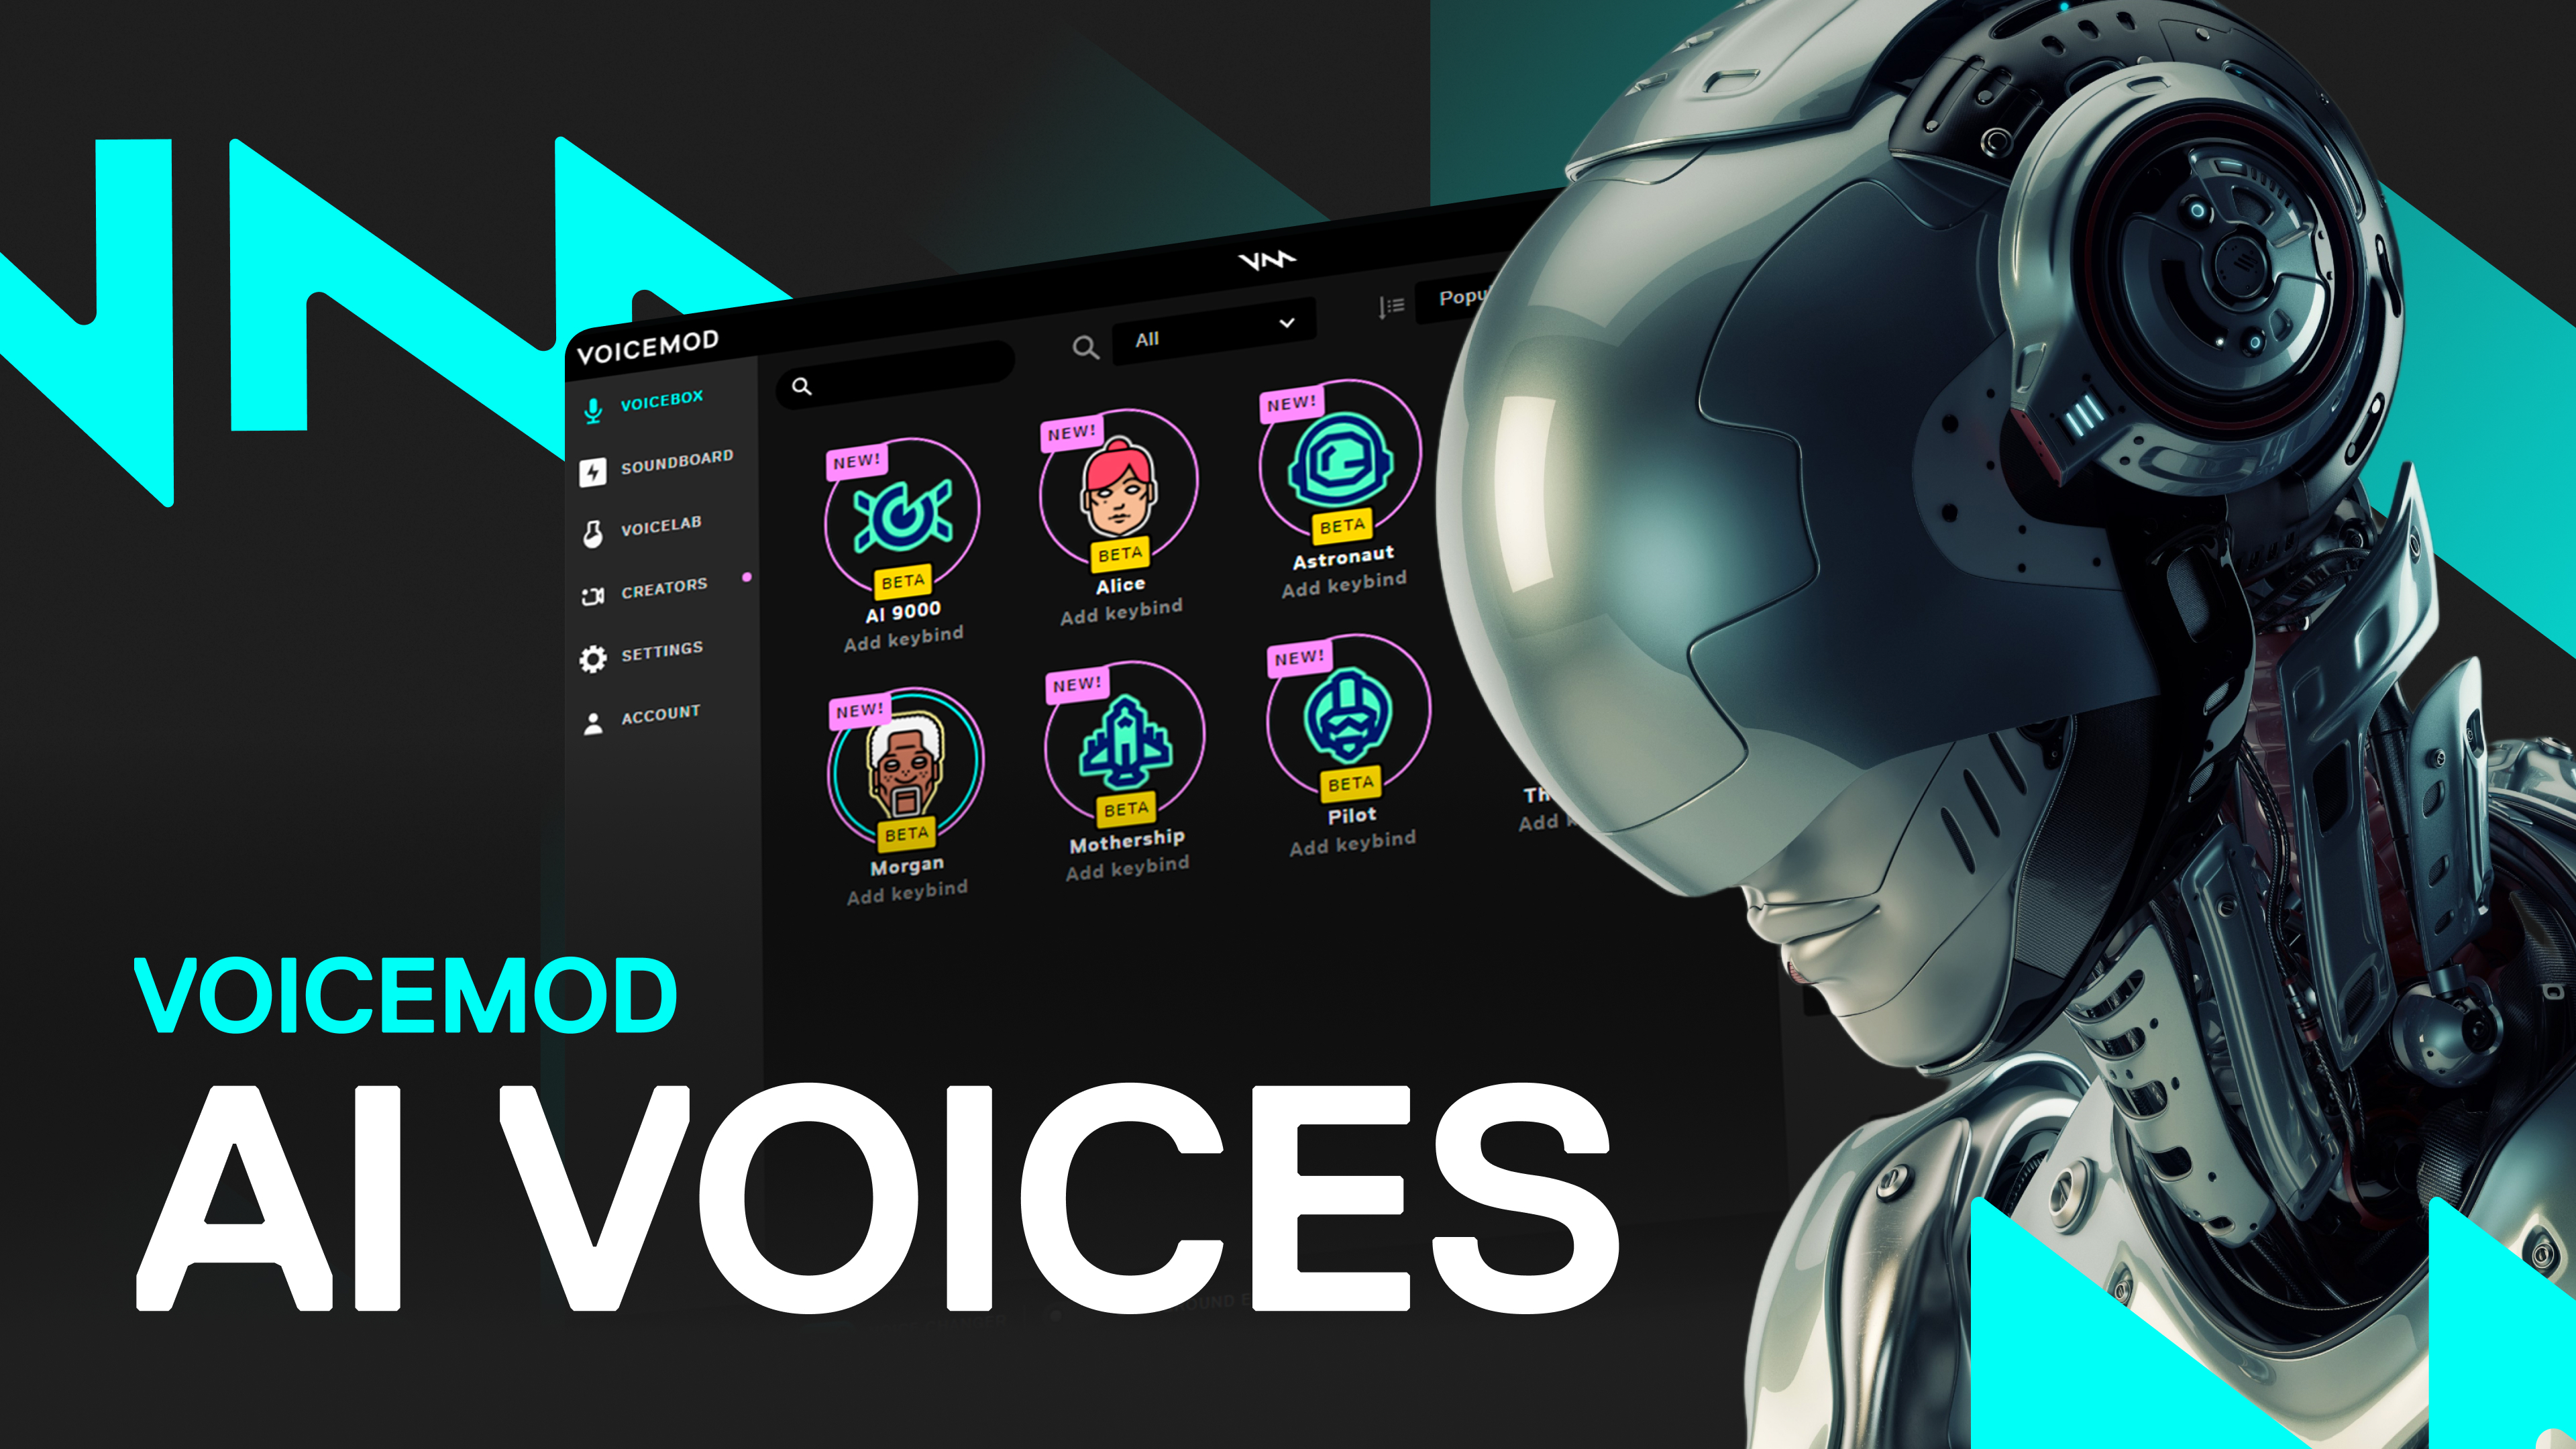 Voicemod Launches World's First Real-Time AI-Powered Voice